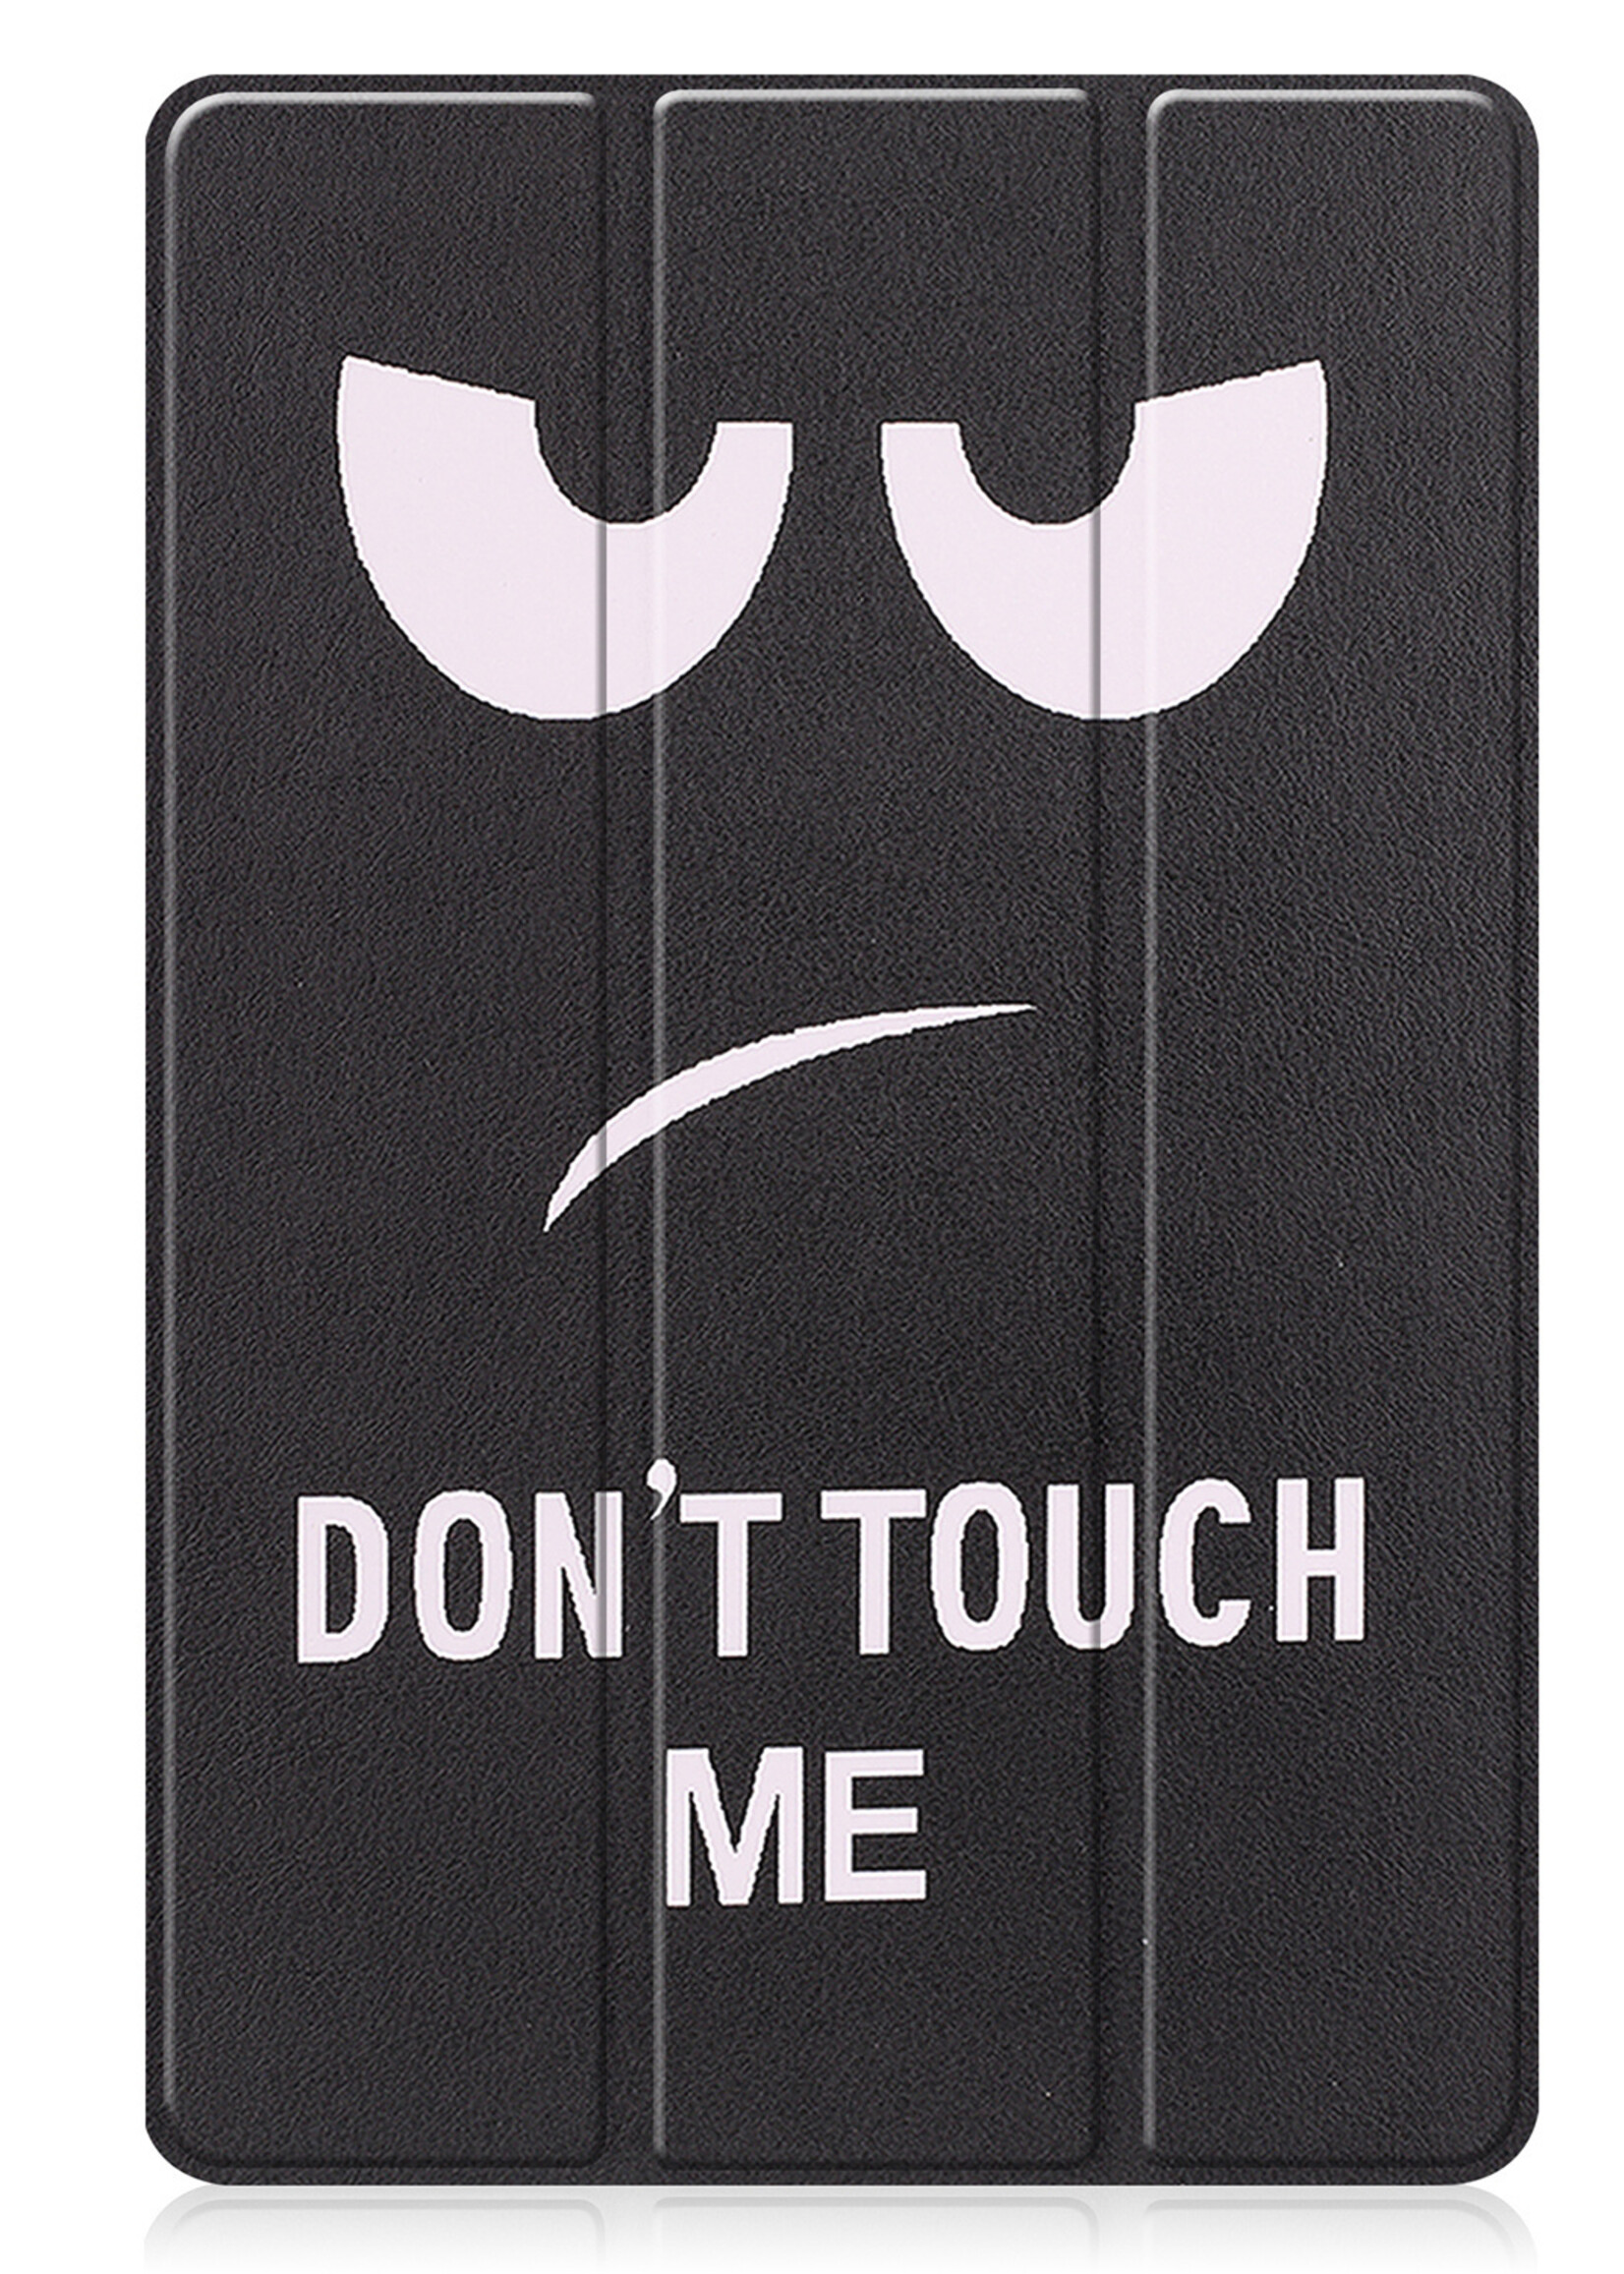 BTH Hoes Geschikt voor Lenovo Tab P11 Pro Hoes Book Case Hoesje Trifold Cover Met Uitsparing Geschikt voor Lenovo Pen Met Screenprotector - Hoesje Geschikt voor Lenovo Tab P11 Pro Hoesje Bookcase - Don't Touch Me